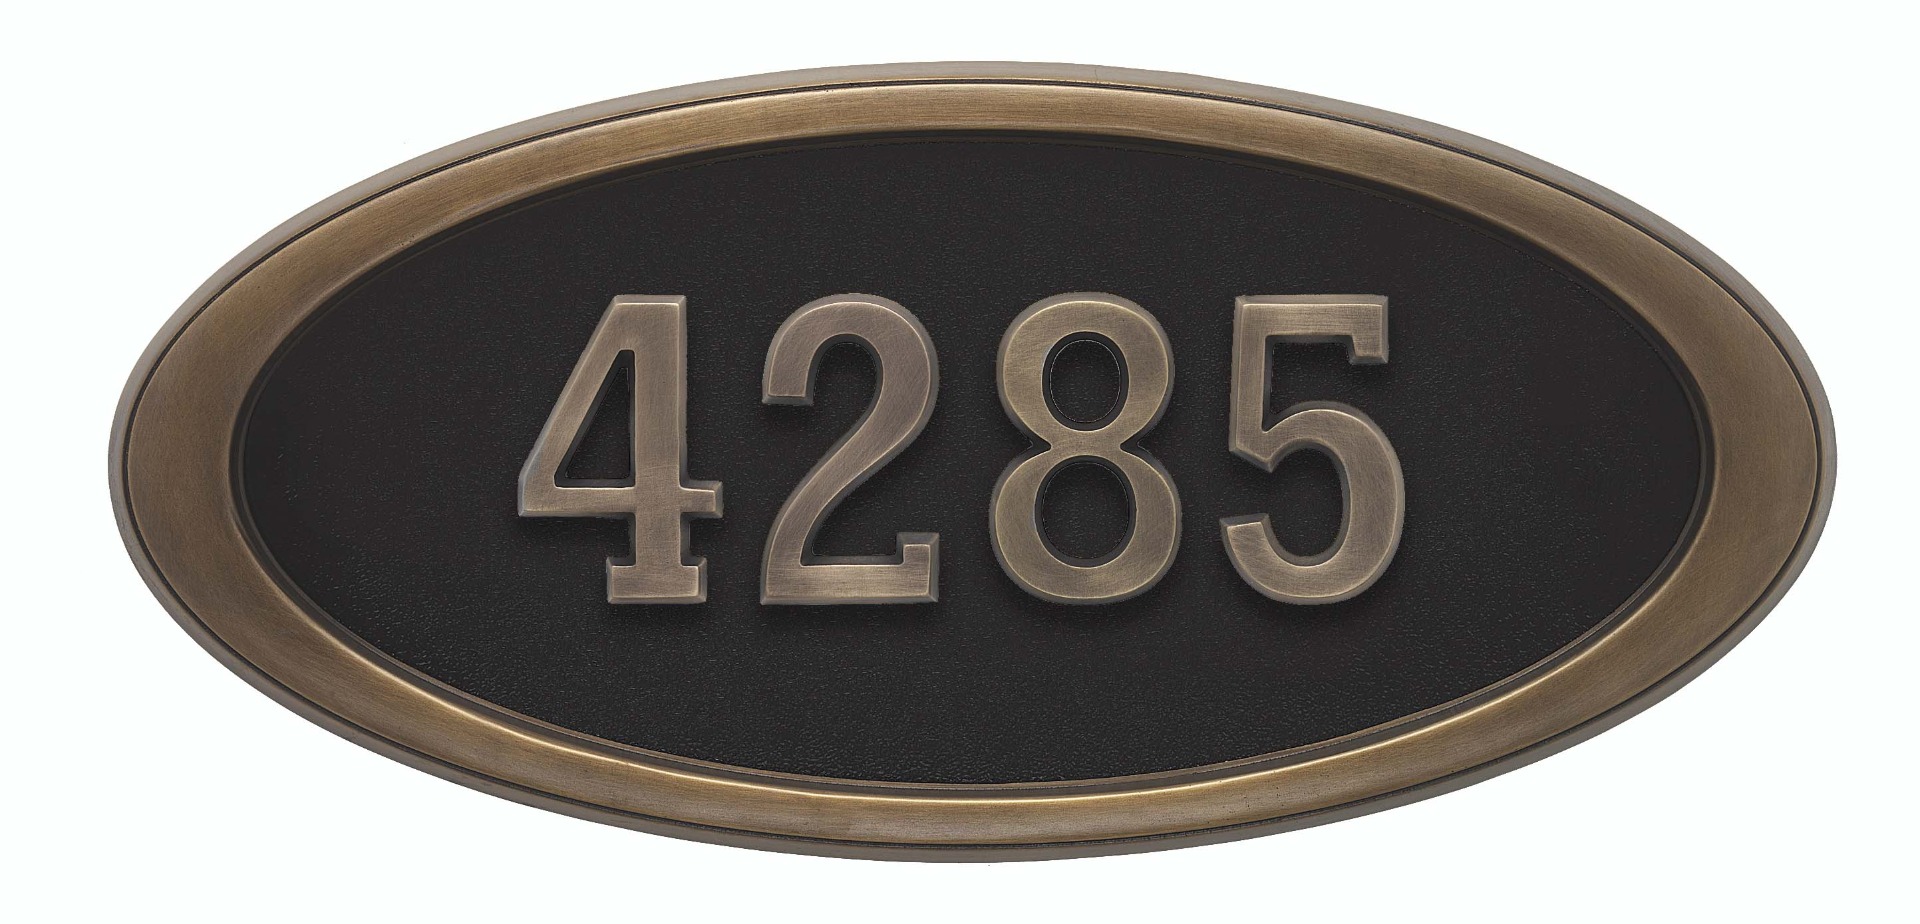 Housemark Large Oval Address Plaques with Trim Color